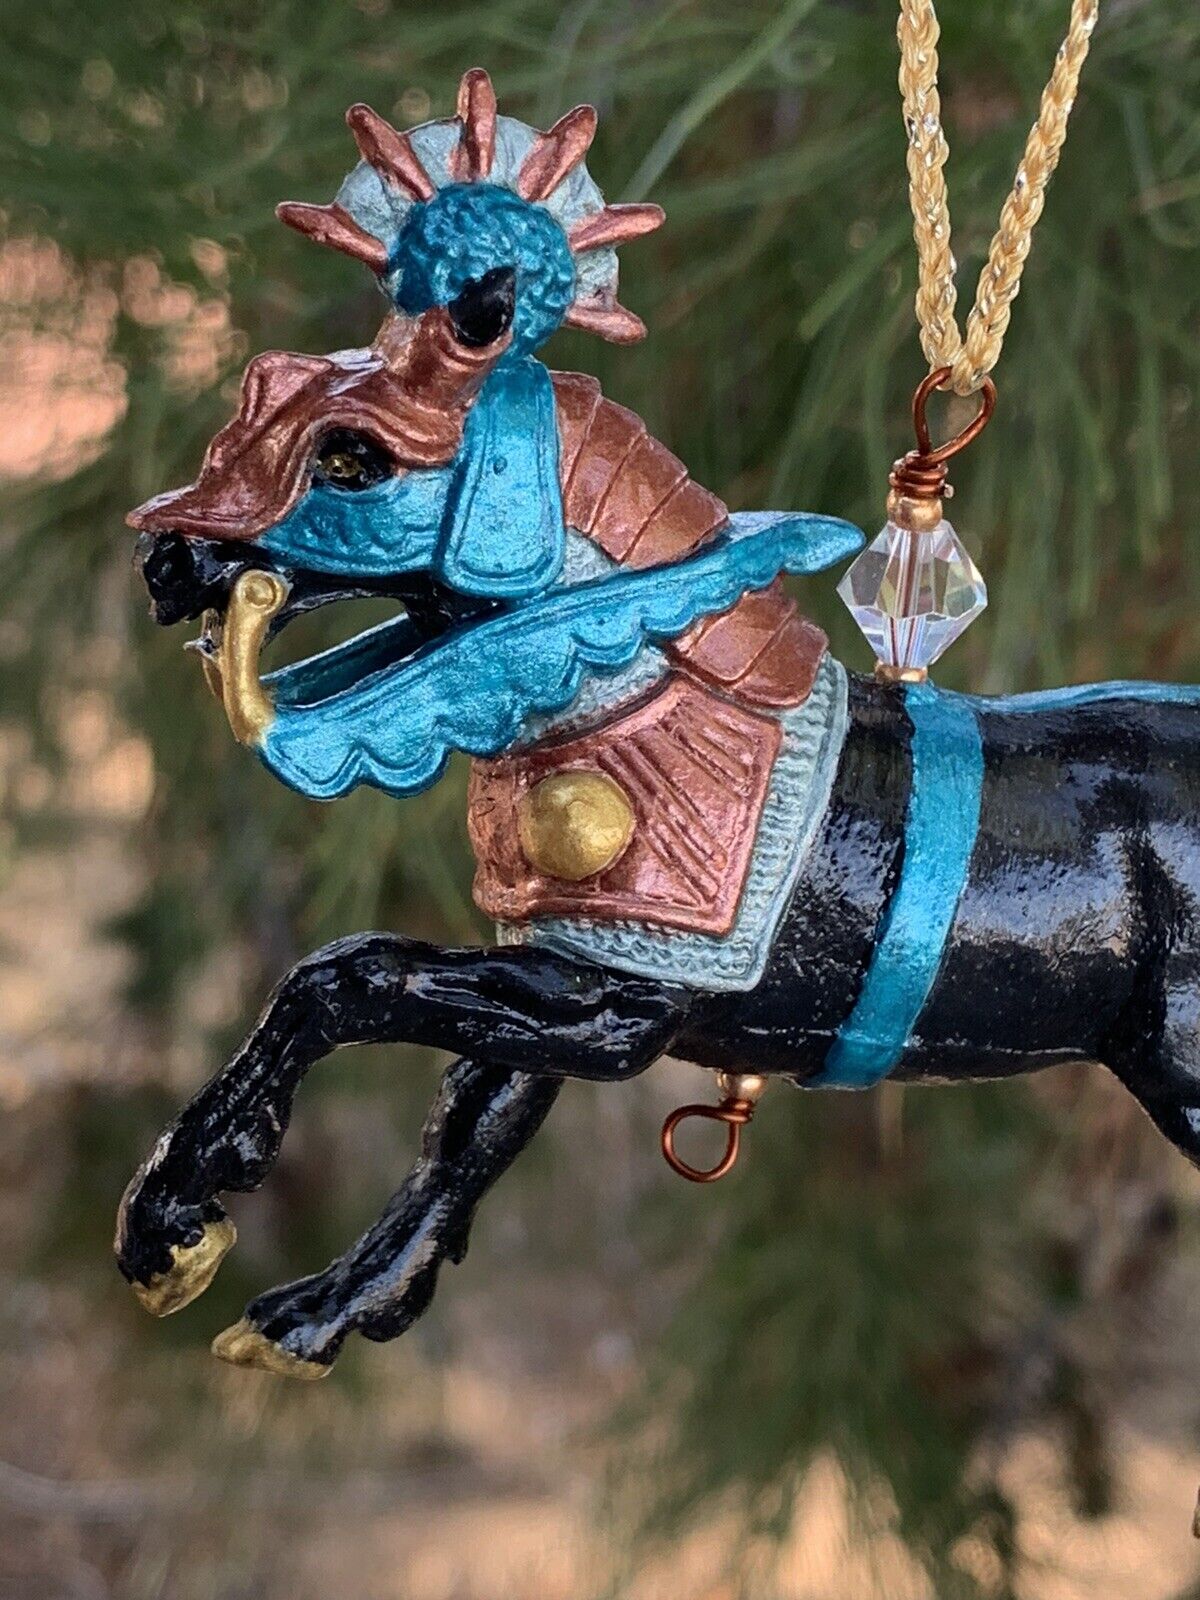 Black Horse Deetail Medieval Knight’s CM Holiday Xmas Ornament Teal Gold Copper